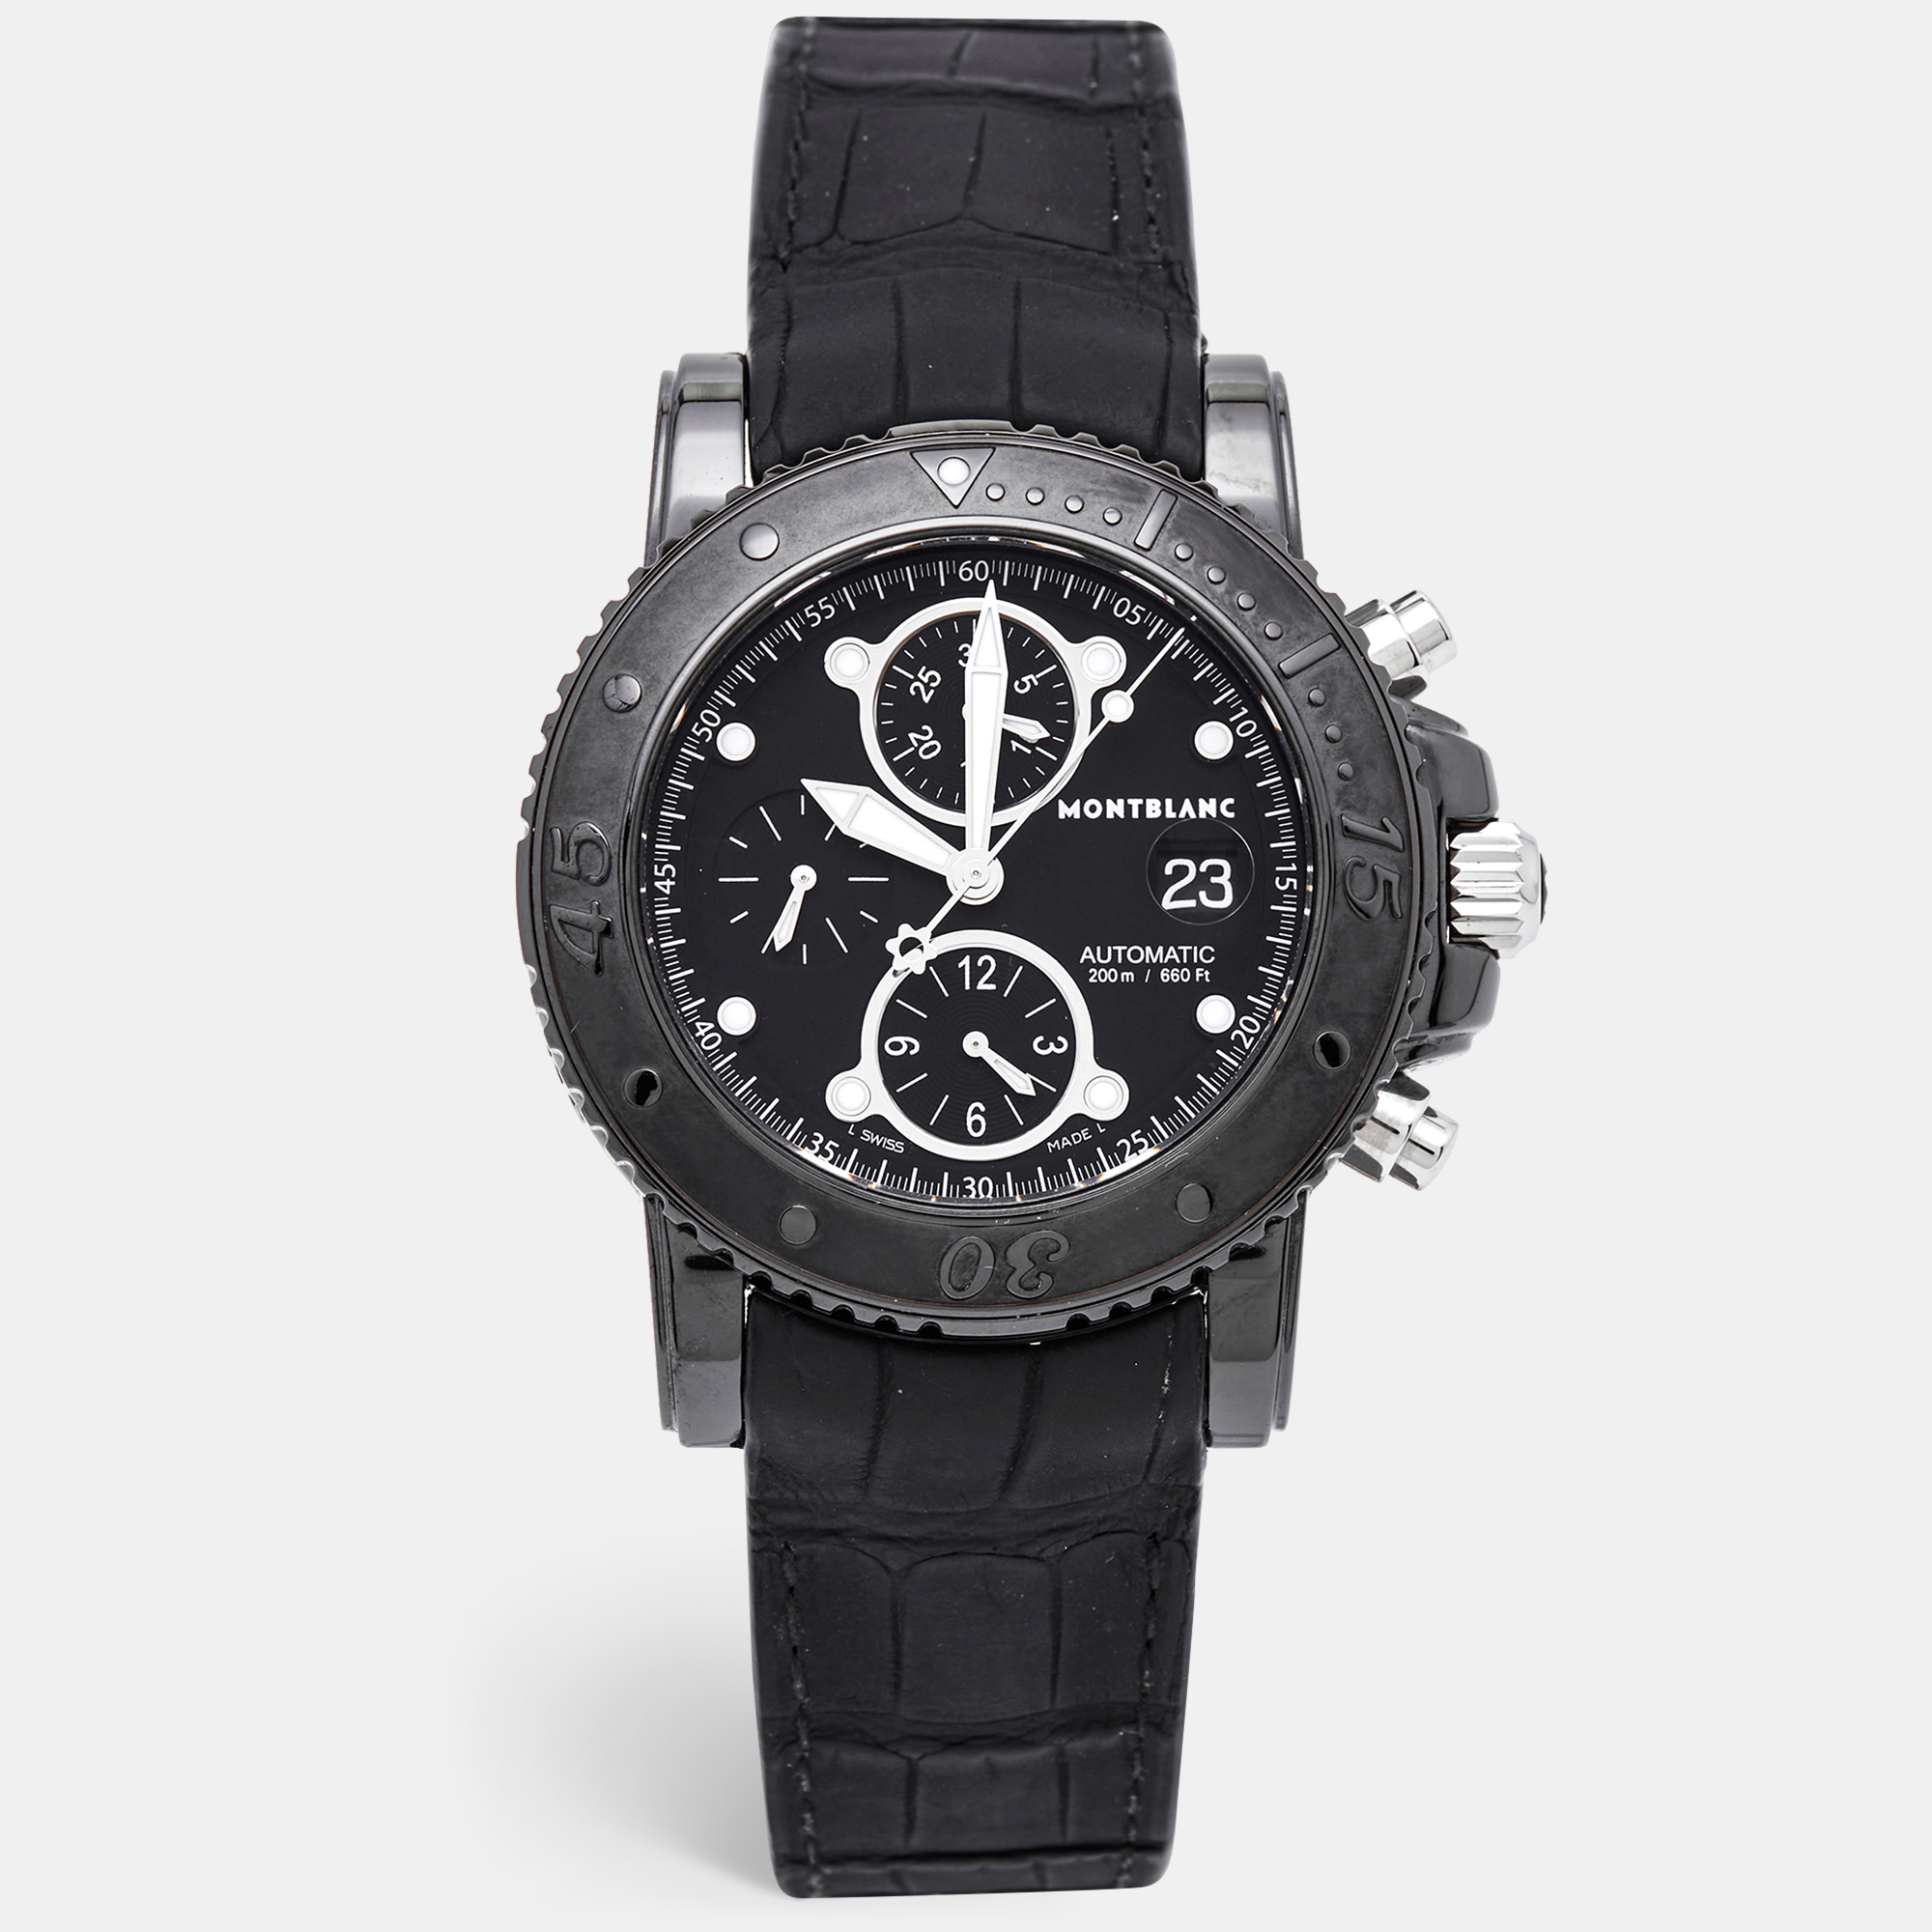 Montblanc Black PVD Coated Stainless Steel Alligator Leather Sport 104279 Men's Wristwatch 44 Mm